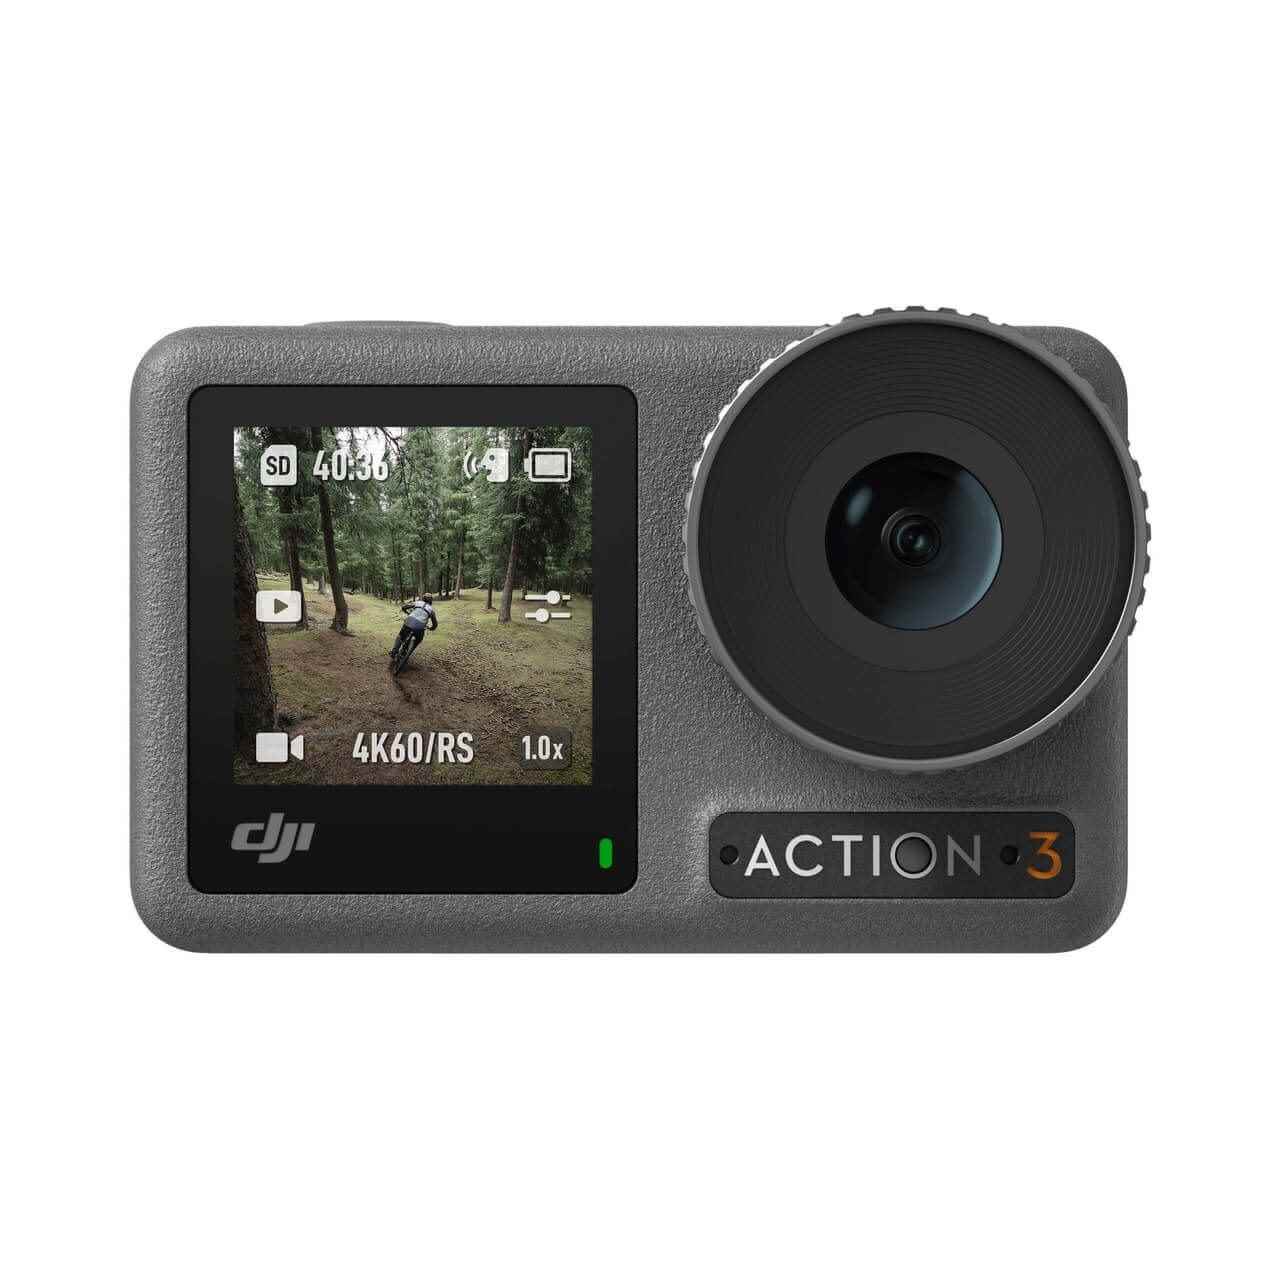 1663183776 945 DJI Osmo Action 3 Introduced Features and Price